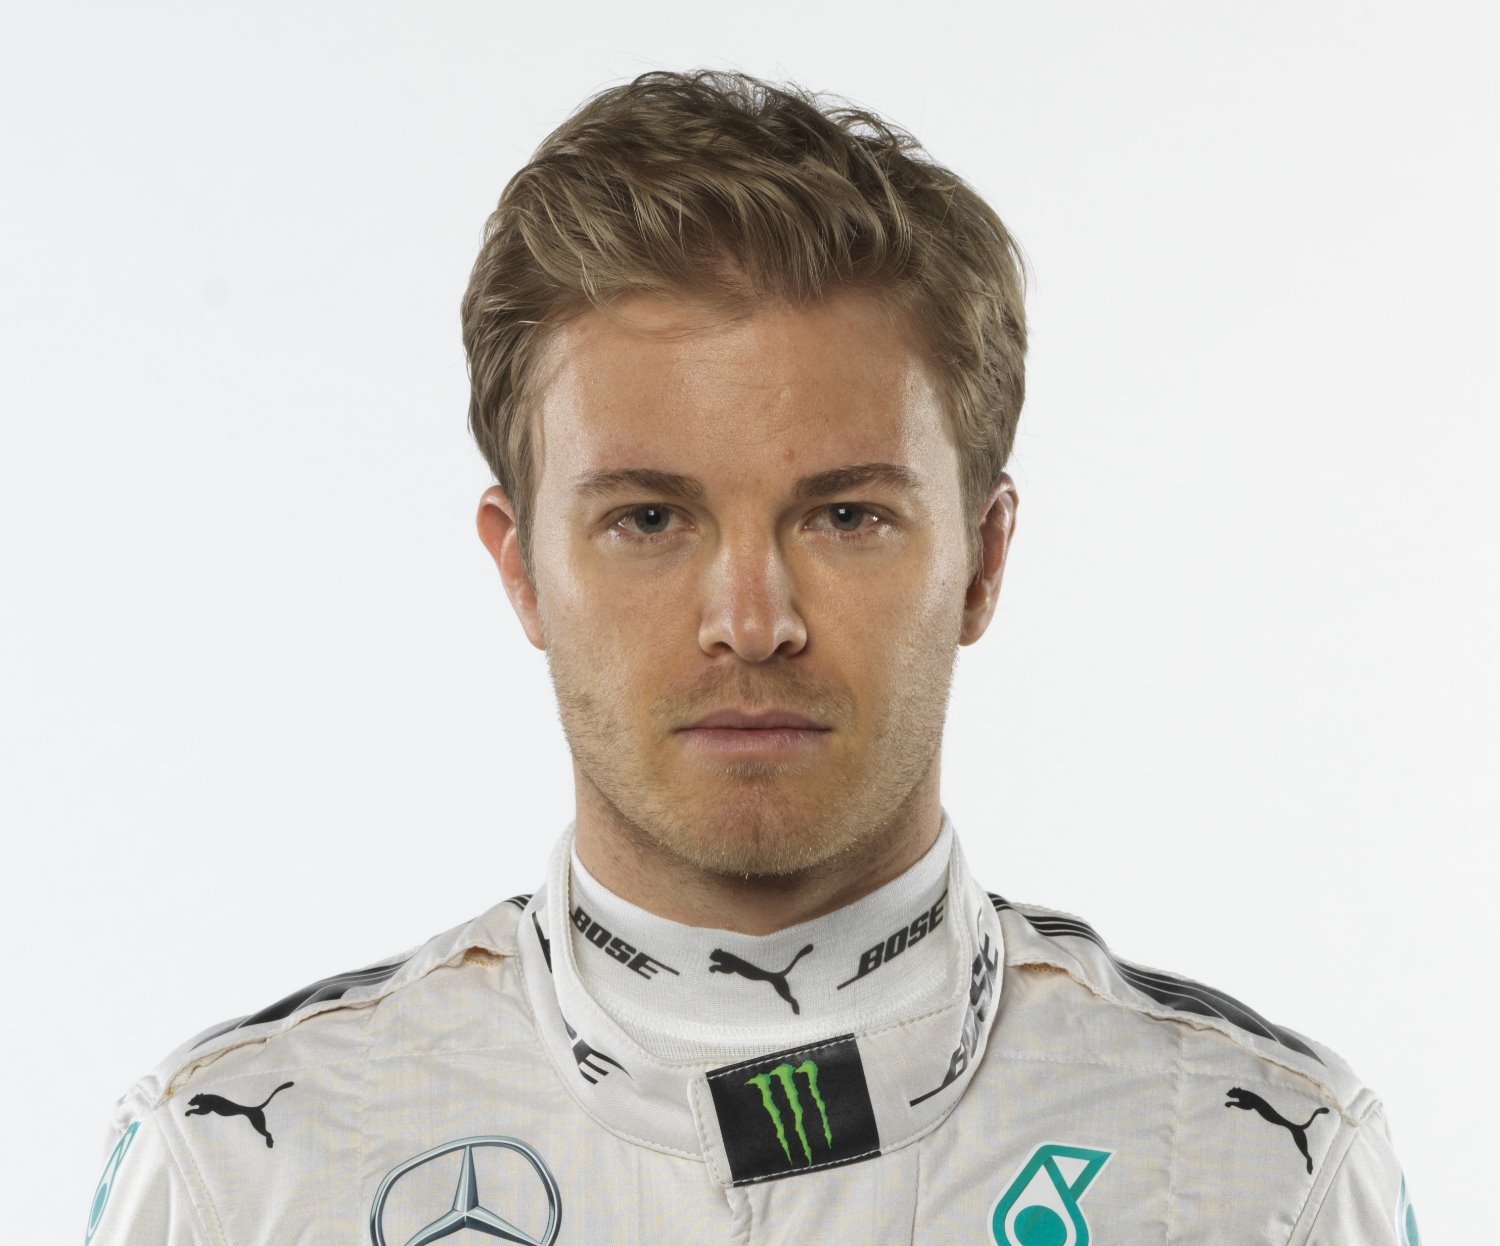 Despite what Berger says, Rosberg isn't coming back to F1